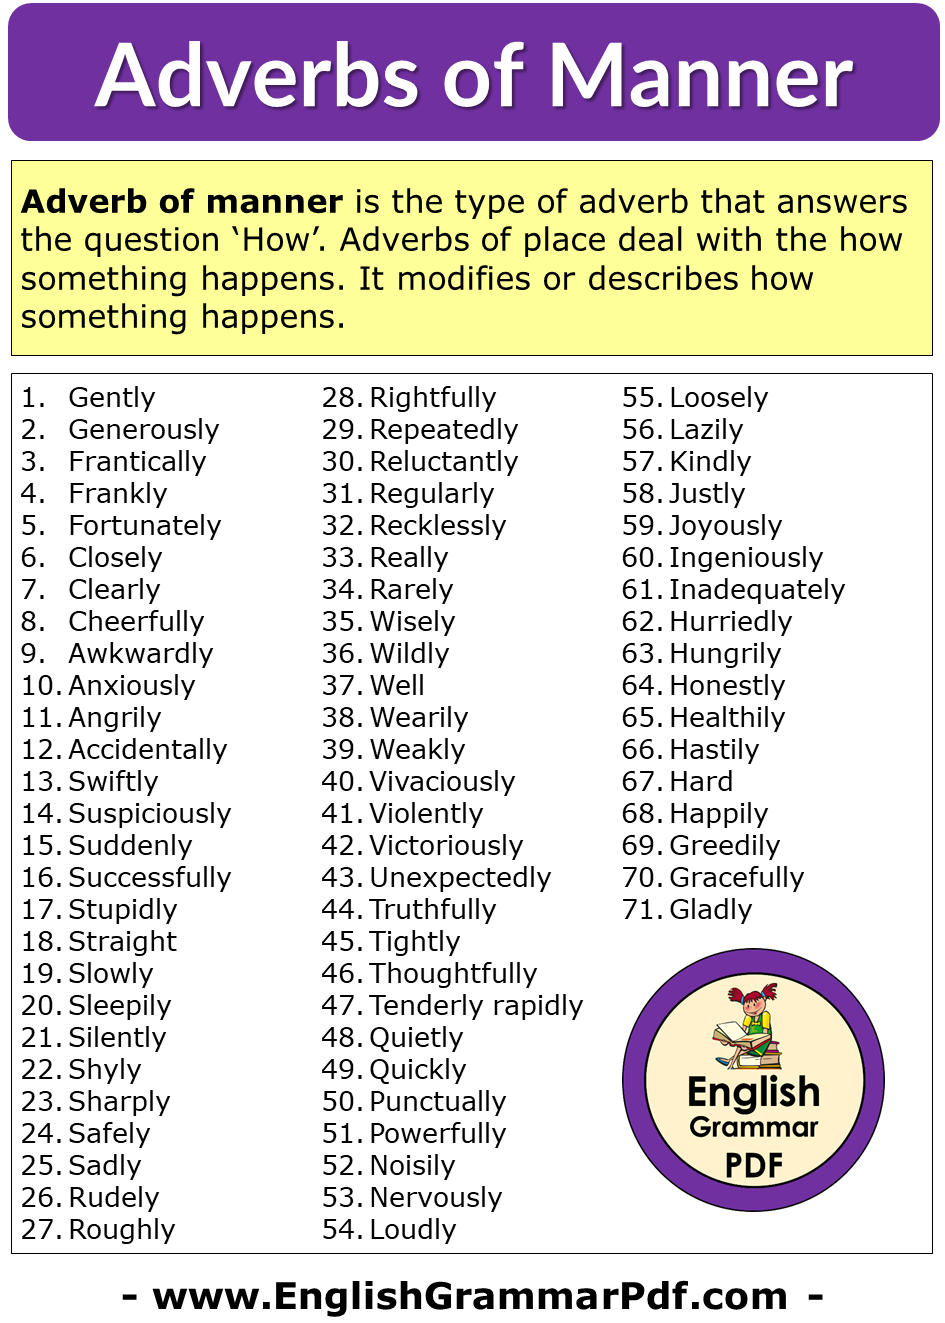 Adverbs of Manner, Definitions and 71 Example Words